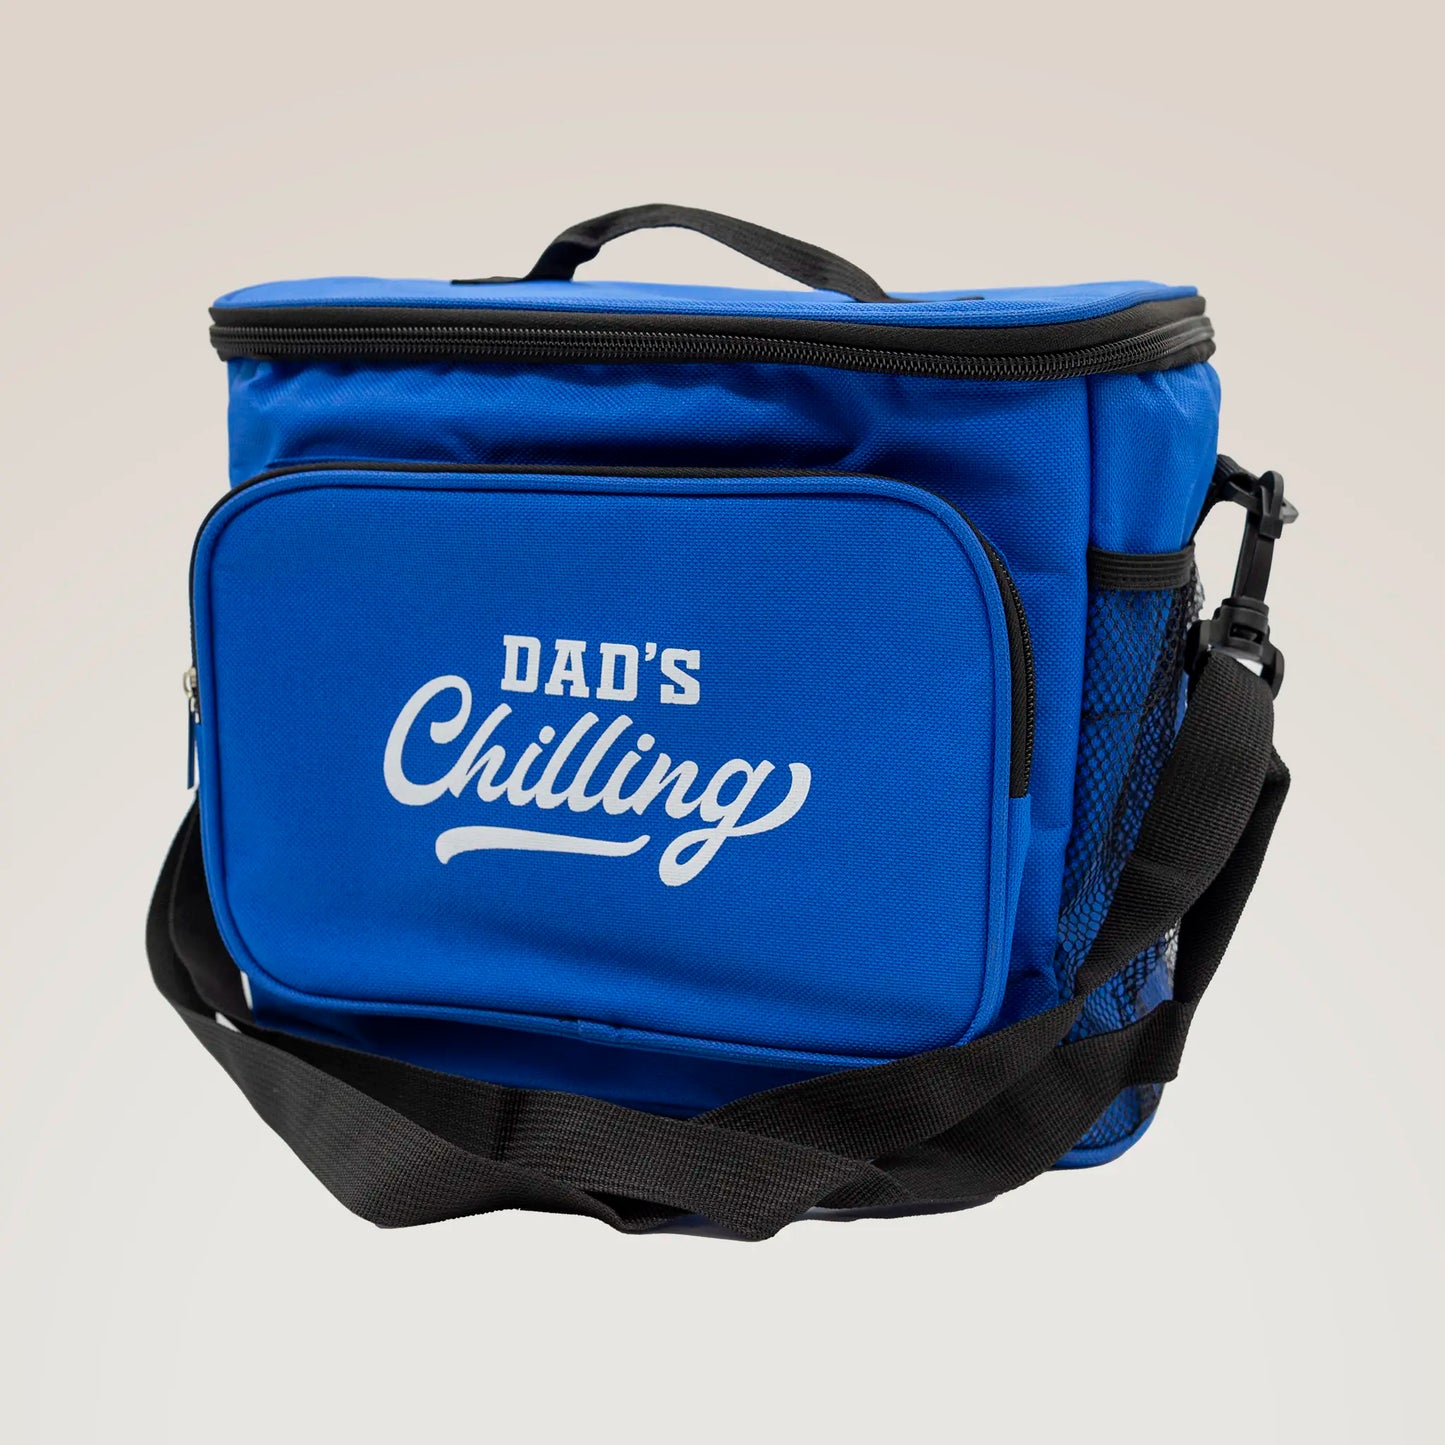 Dad's Chilling Lunch Cooler Bag